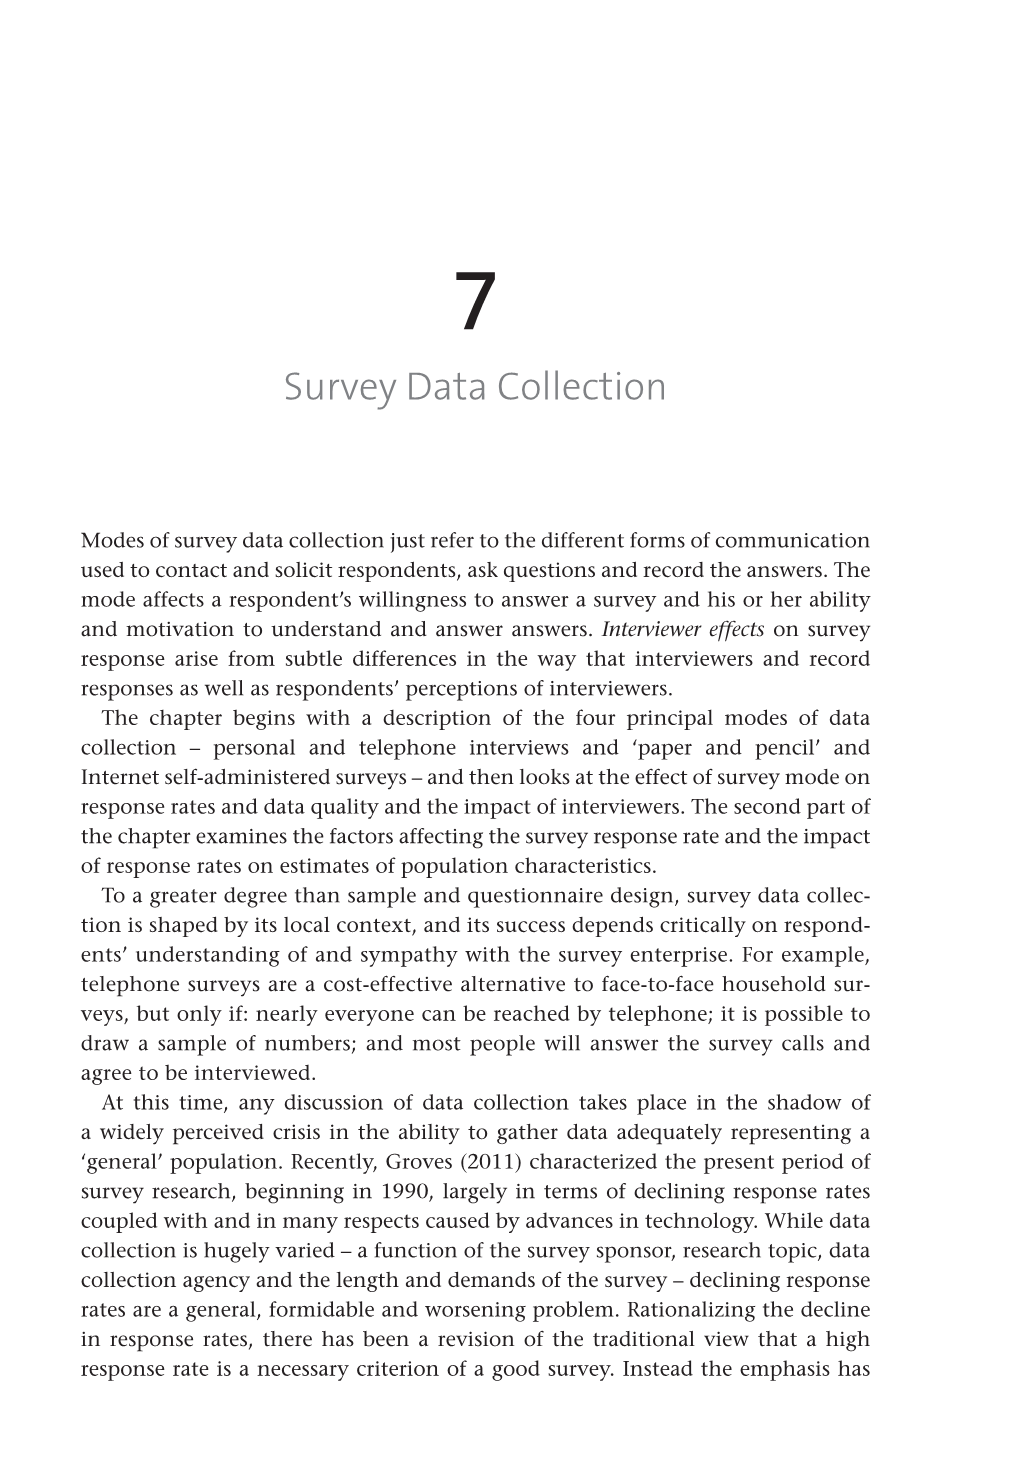 Survey Data Collection. in a Companion to Survey Research